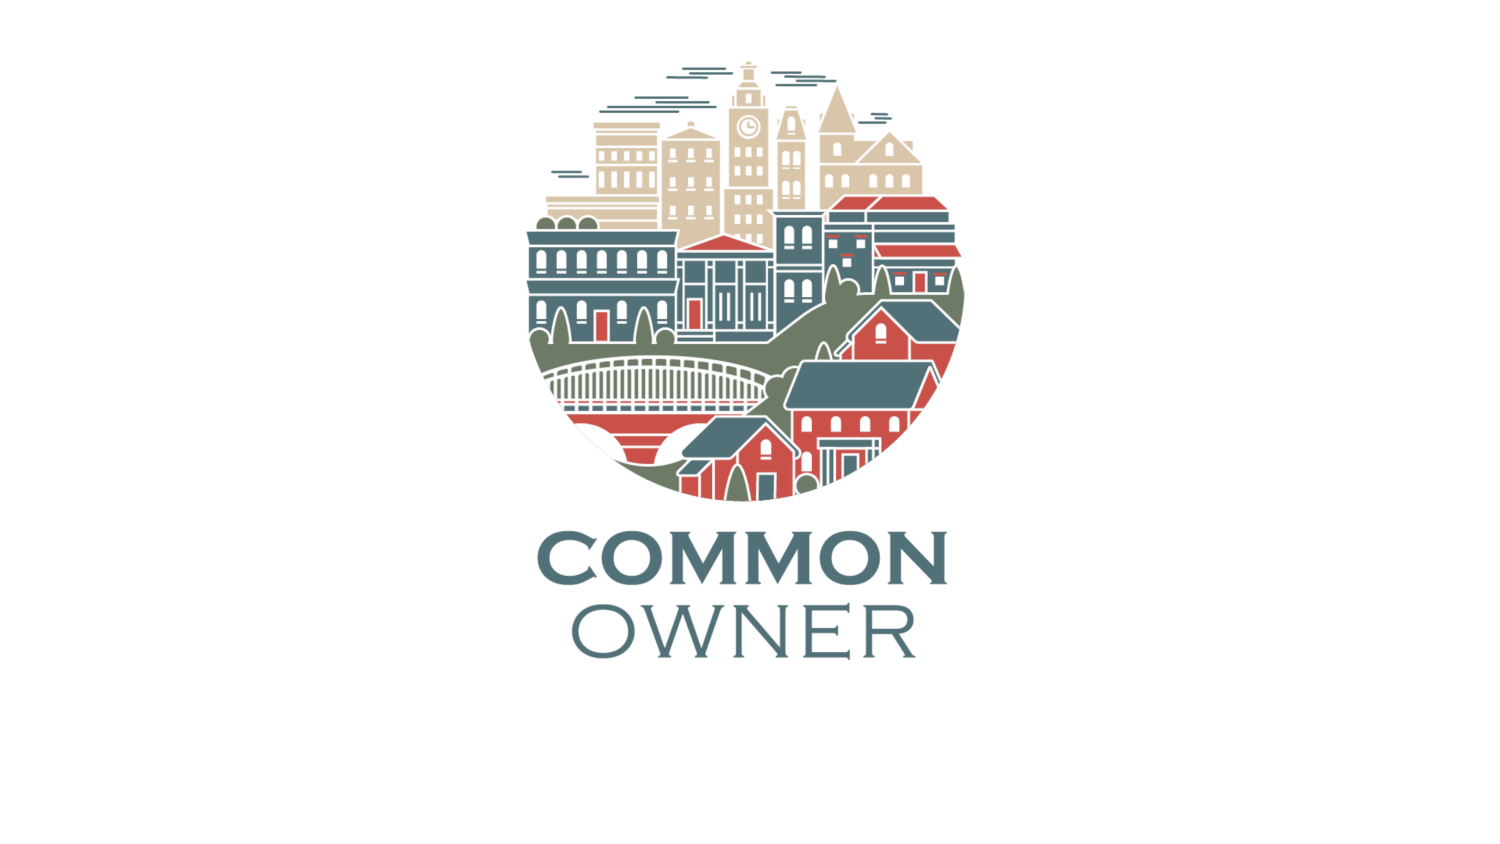 Common Owner CF Officially Becomes the 58th Registered Funding Portal in the United States